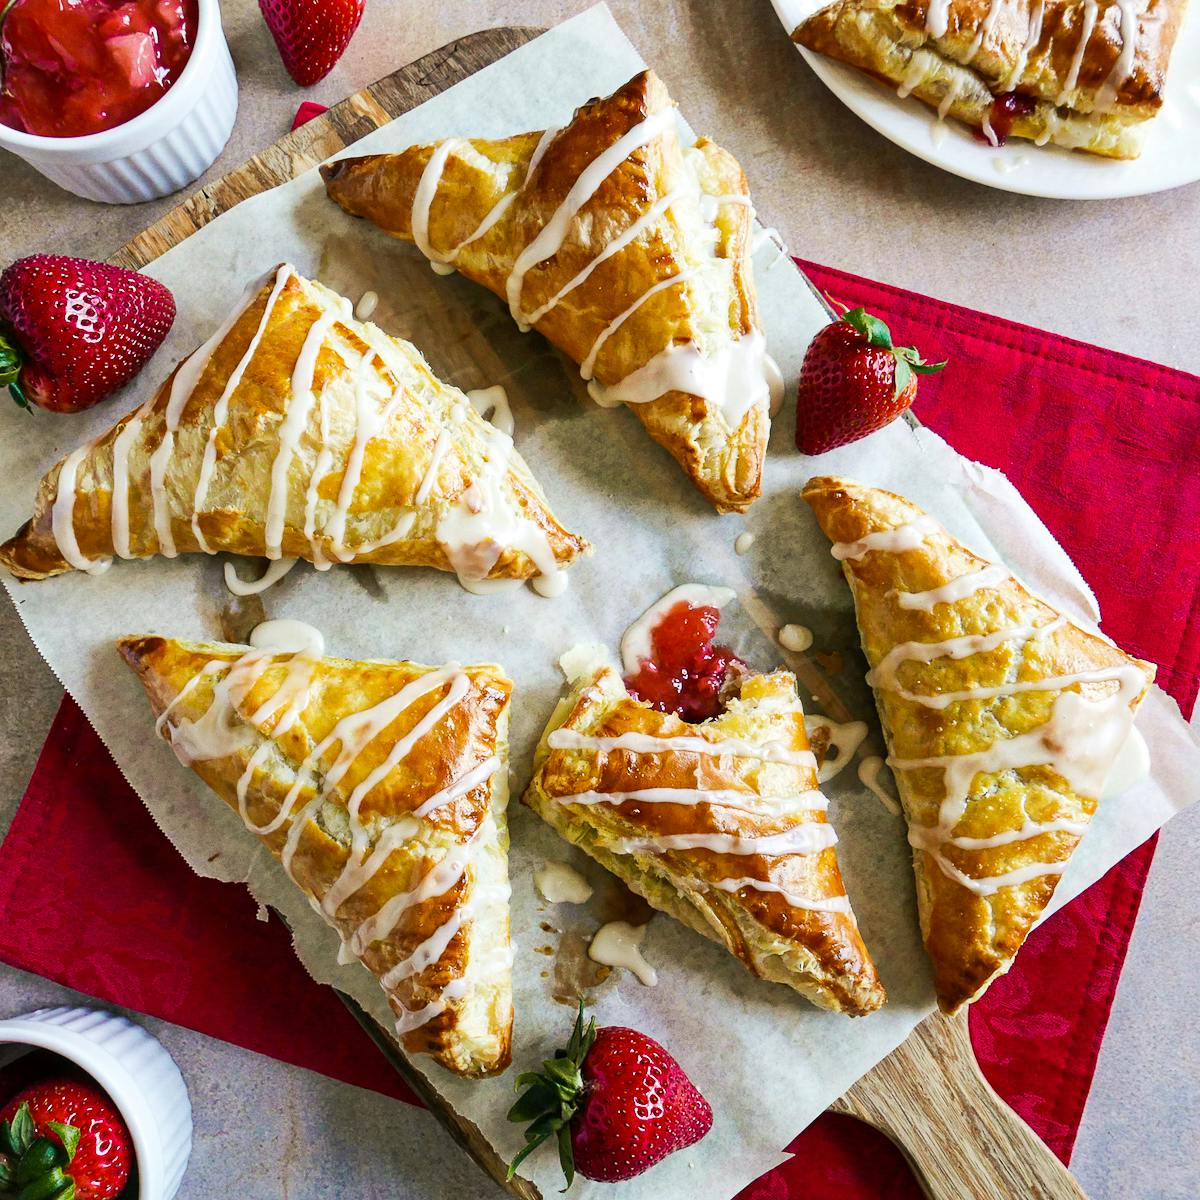 Five strawberry turnovers arranged on parchment paper.